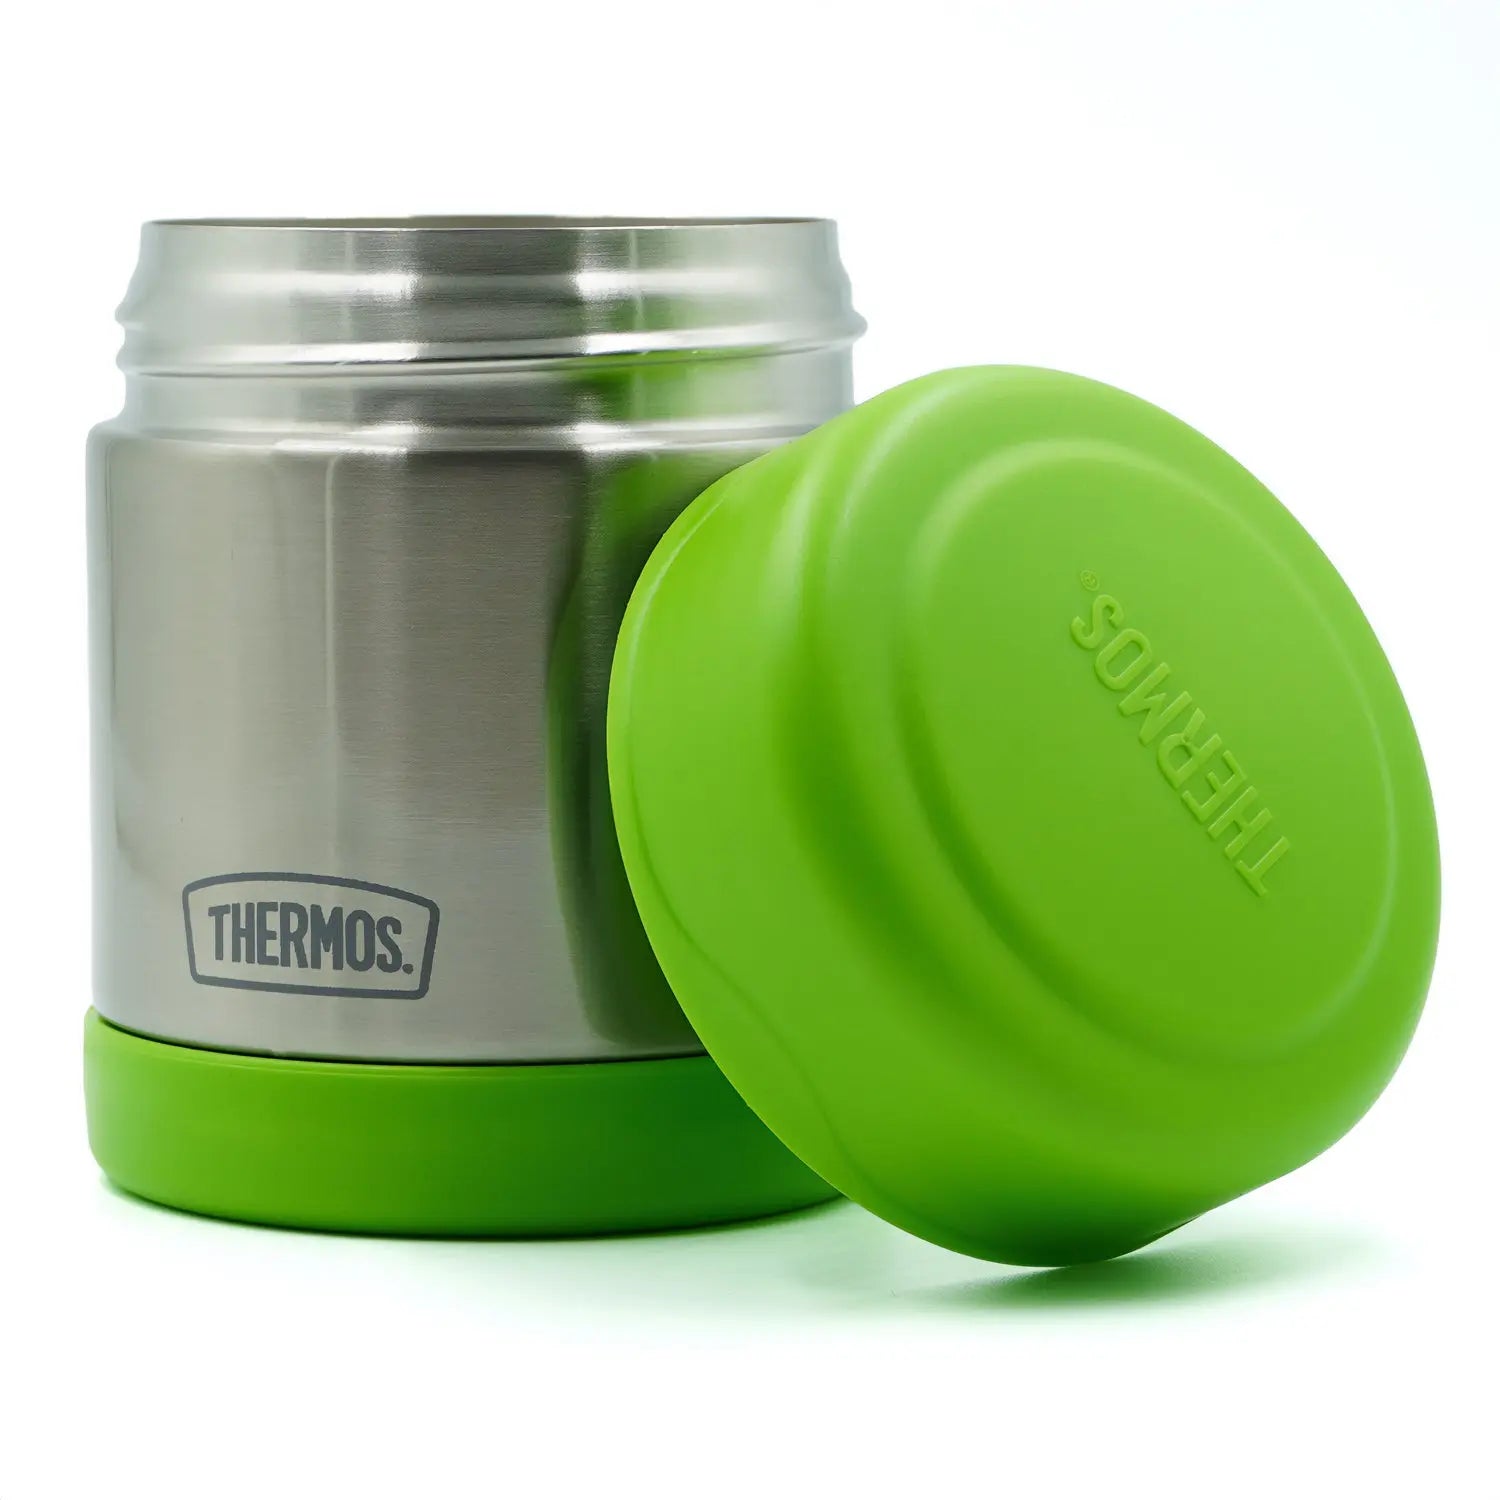 Thermos 10 oz. Vacuum Insulated Stainless Steel Food Jar - Lime/Stainless Steel Thermos